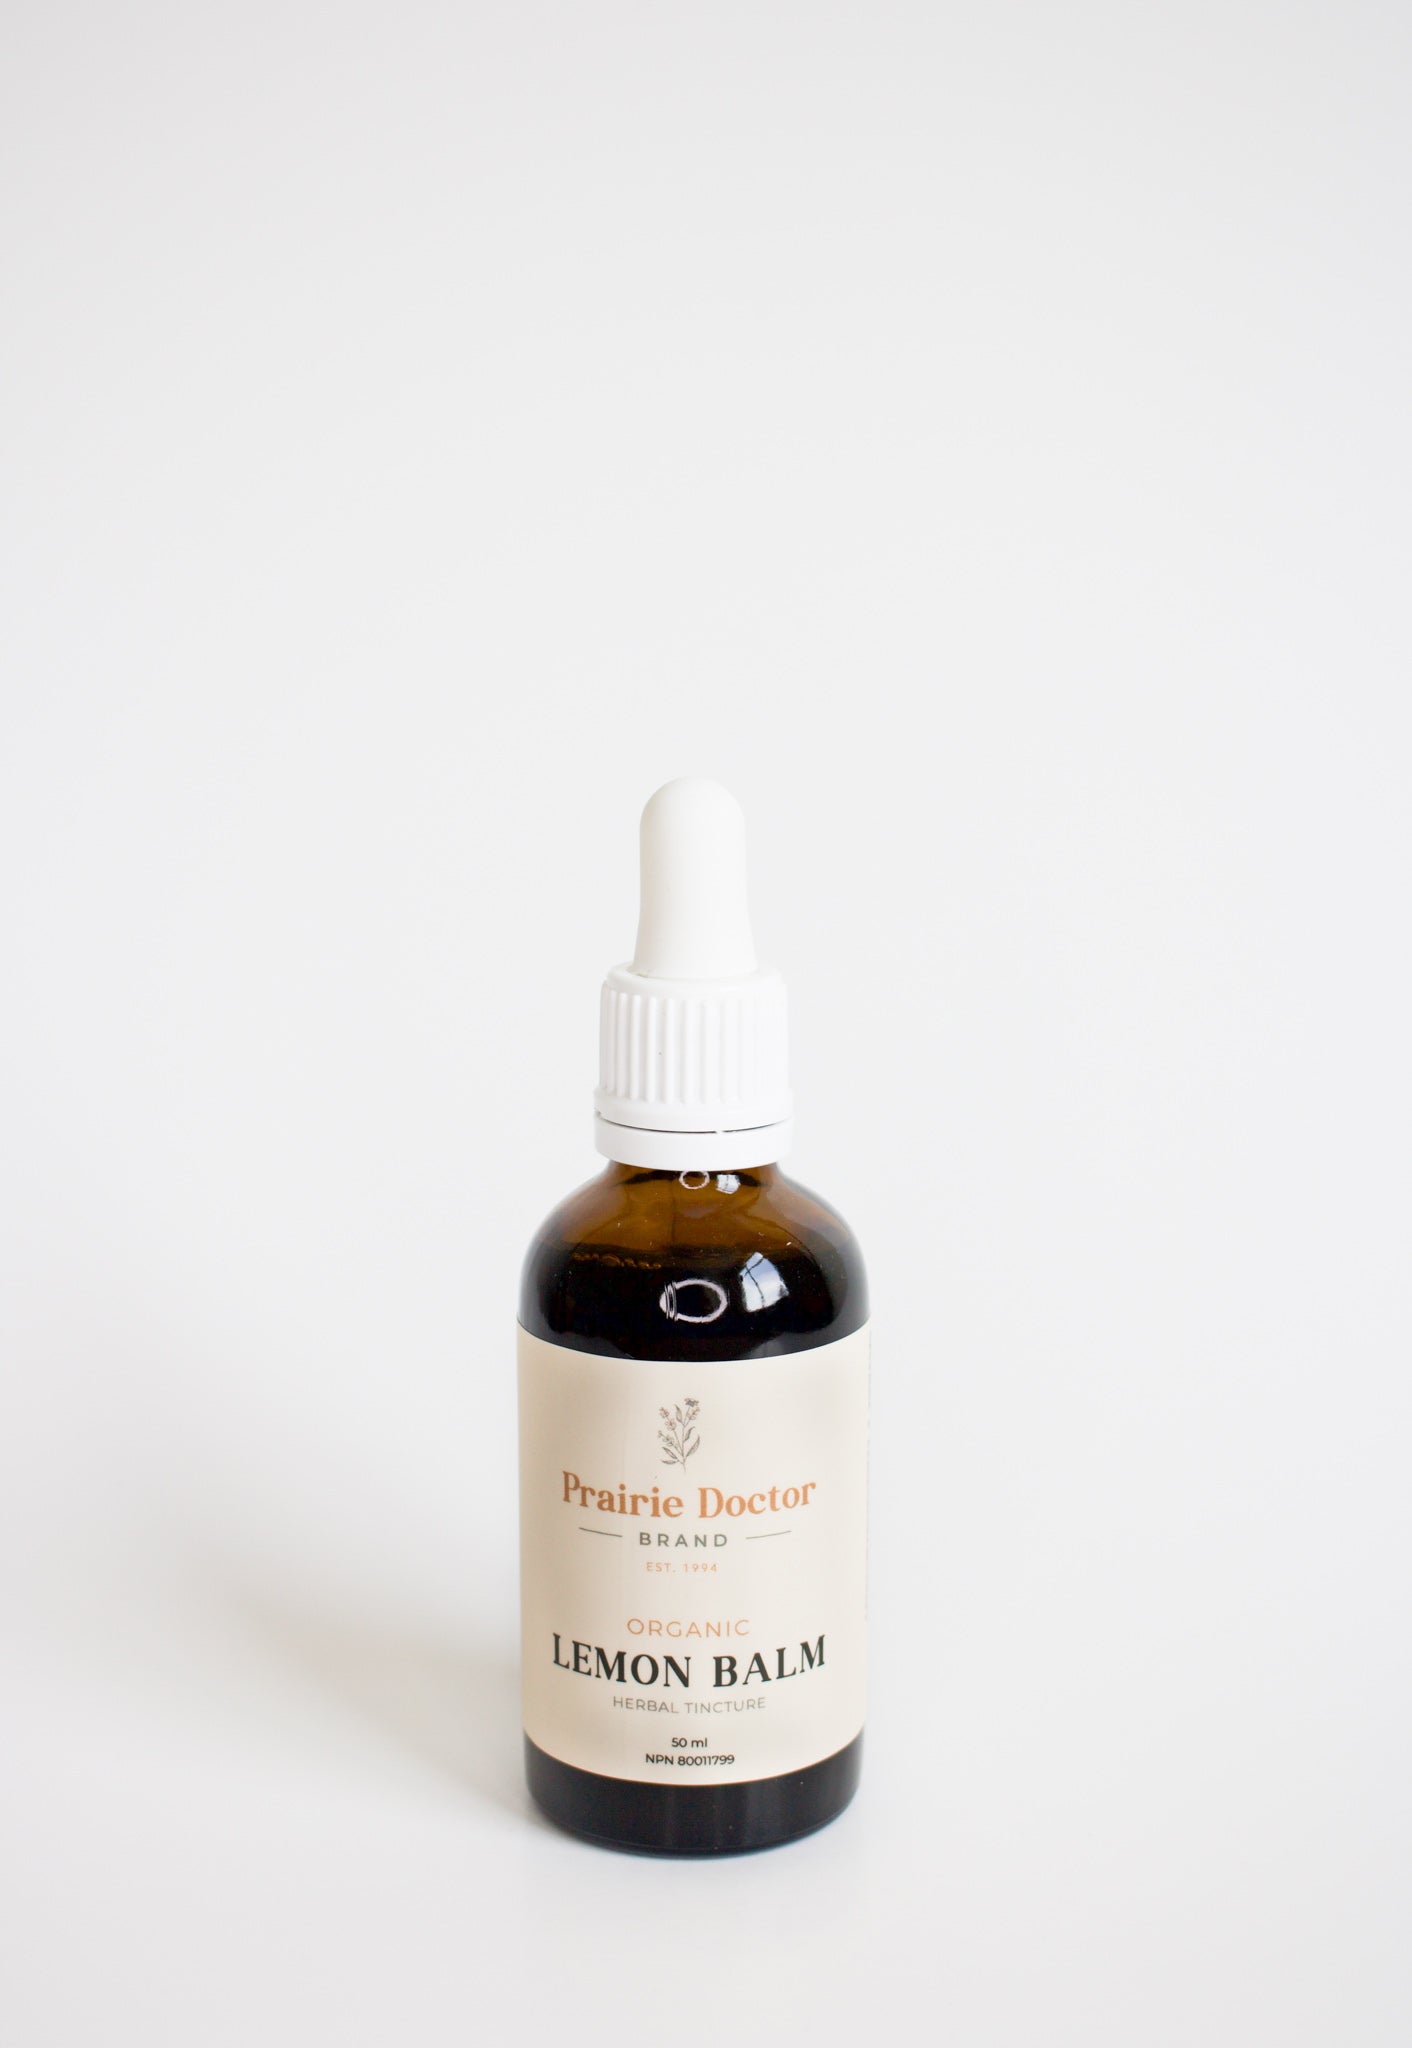 Our organic Lemon Balm herbal tincture has traditionally been used in Herbal Medicine as a sleep aid (in cases of restlessness or insomnia due to mental stress and to help relieve digestive disturbances, such as dyspepsia.